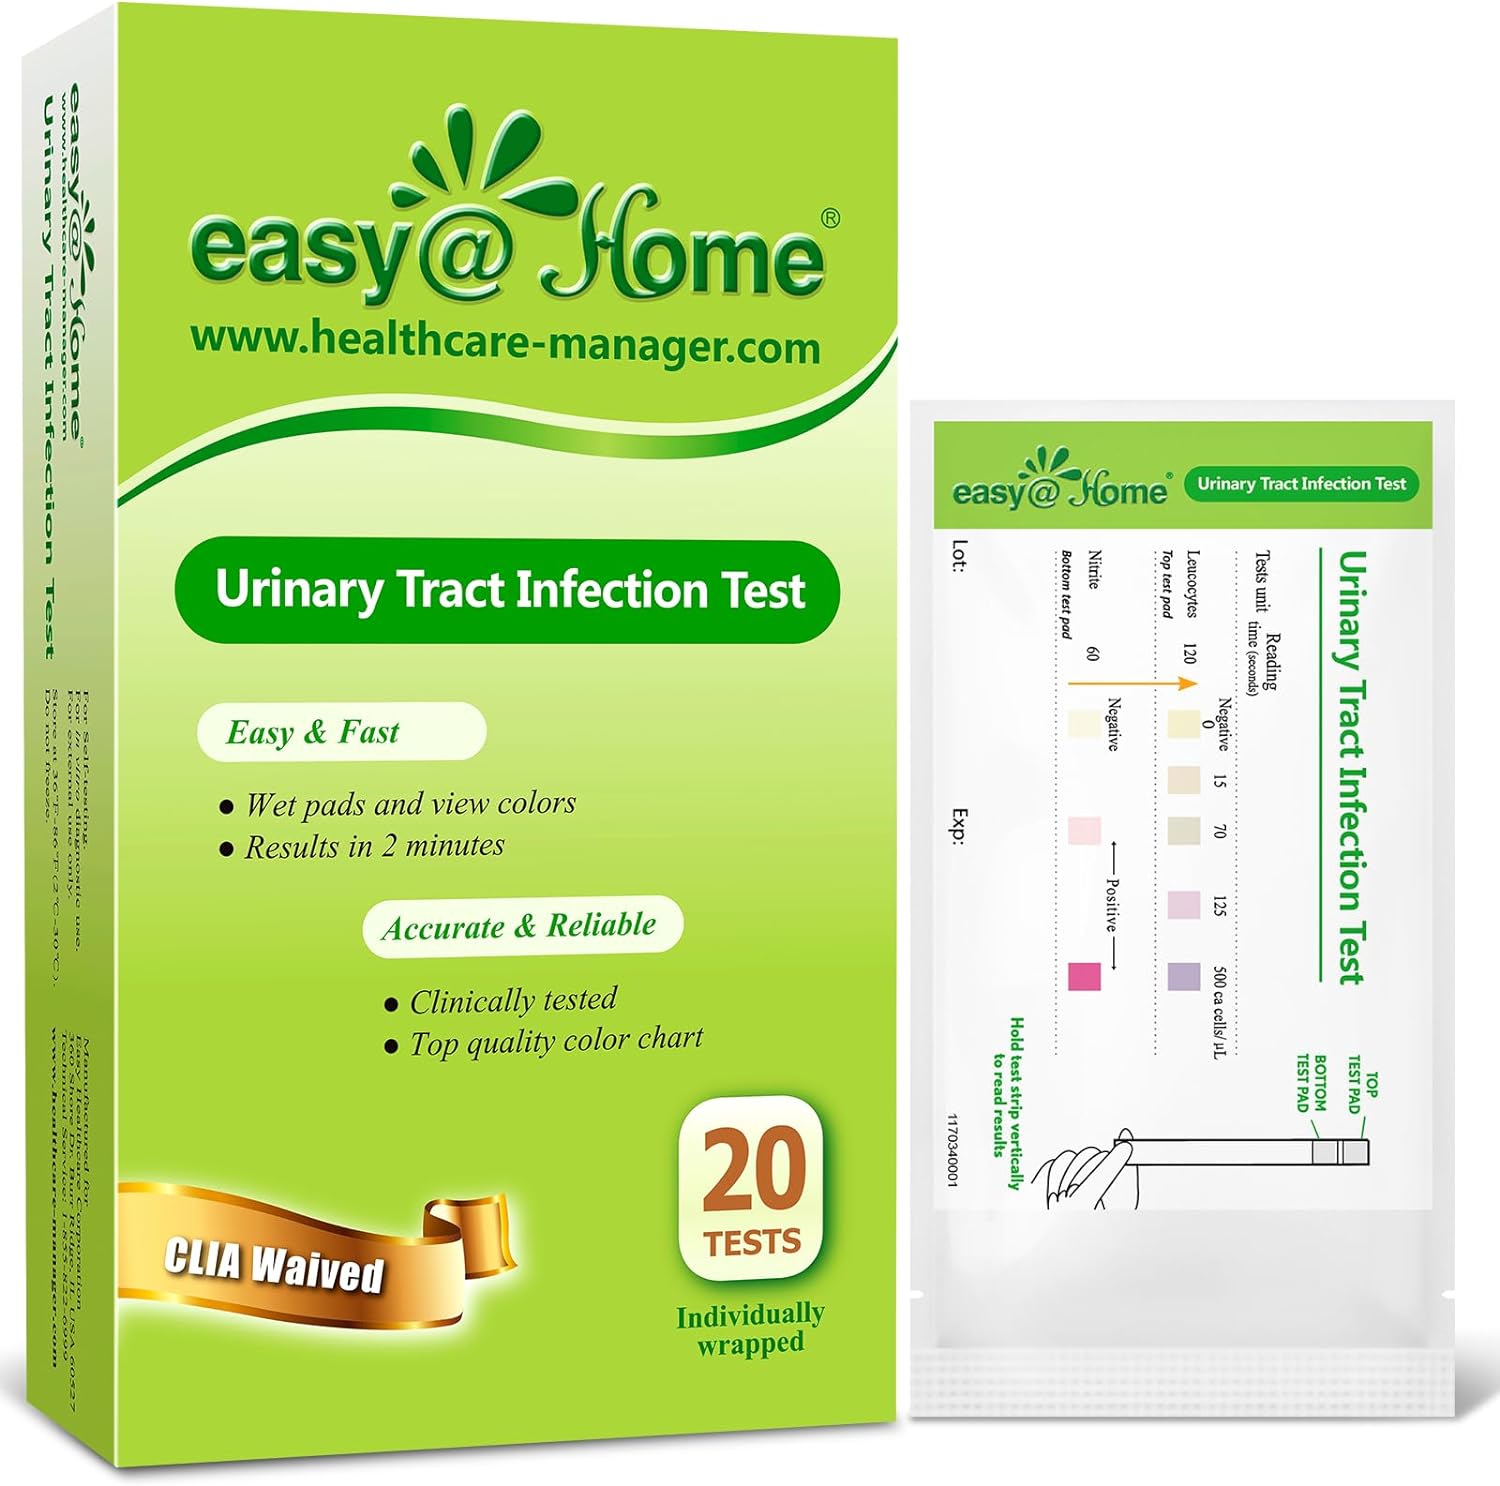 Easy@Home 20 Individual Pouches Urinary Tract Infection FSA Eligible Test Strips (UTI Test Strips) Monitor Bladder or Urinary Tract Issues by Testing Urine, 20 Tests/Box-FDA Cleared (UTI-20P)